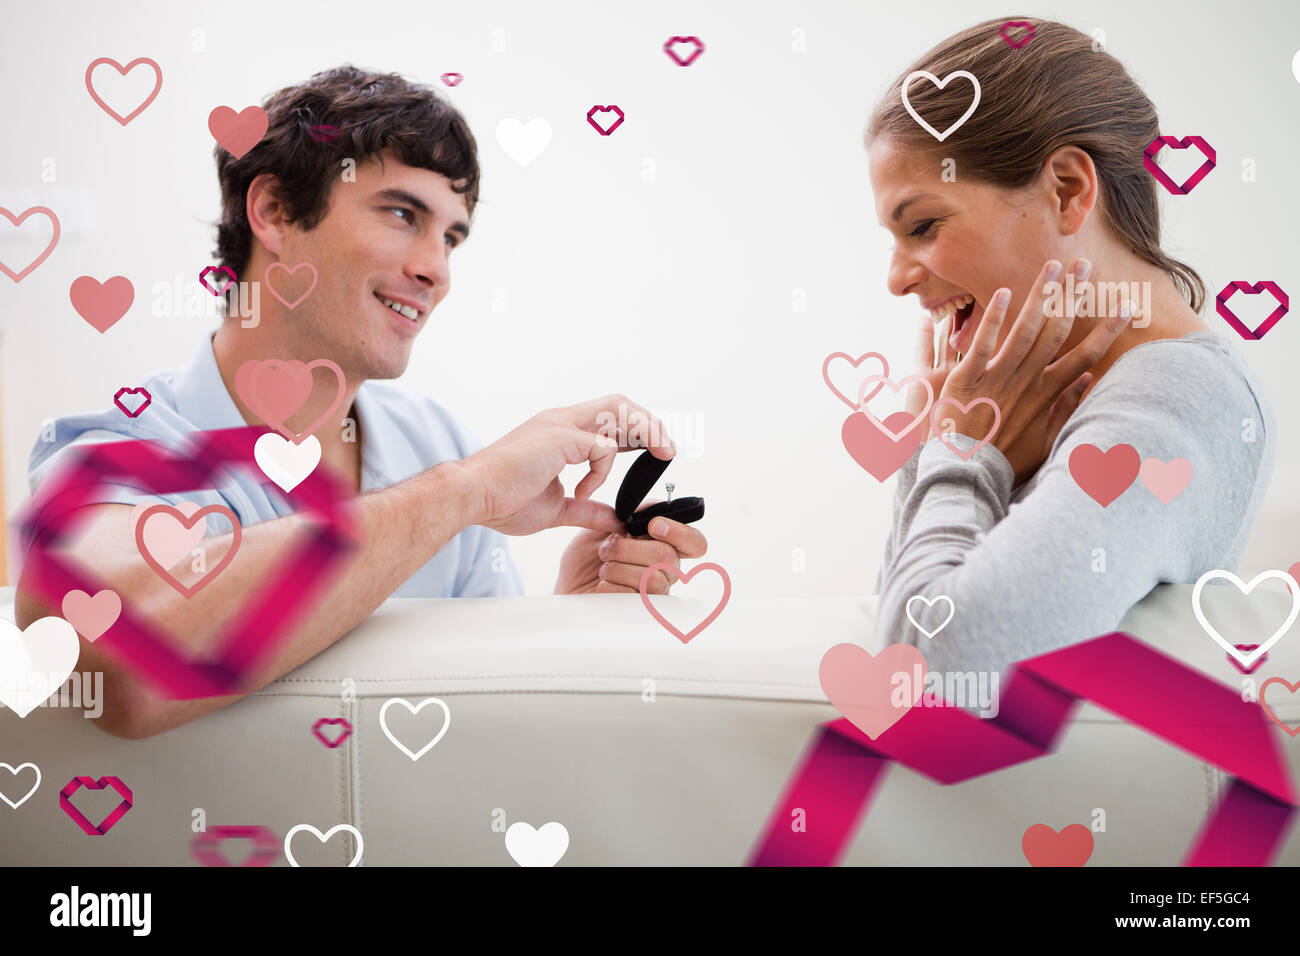 Composite image of man making a proposal of marriage Stock Photo